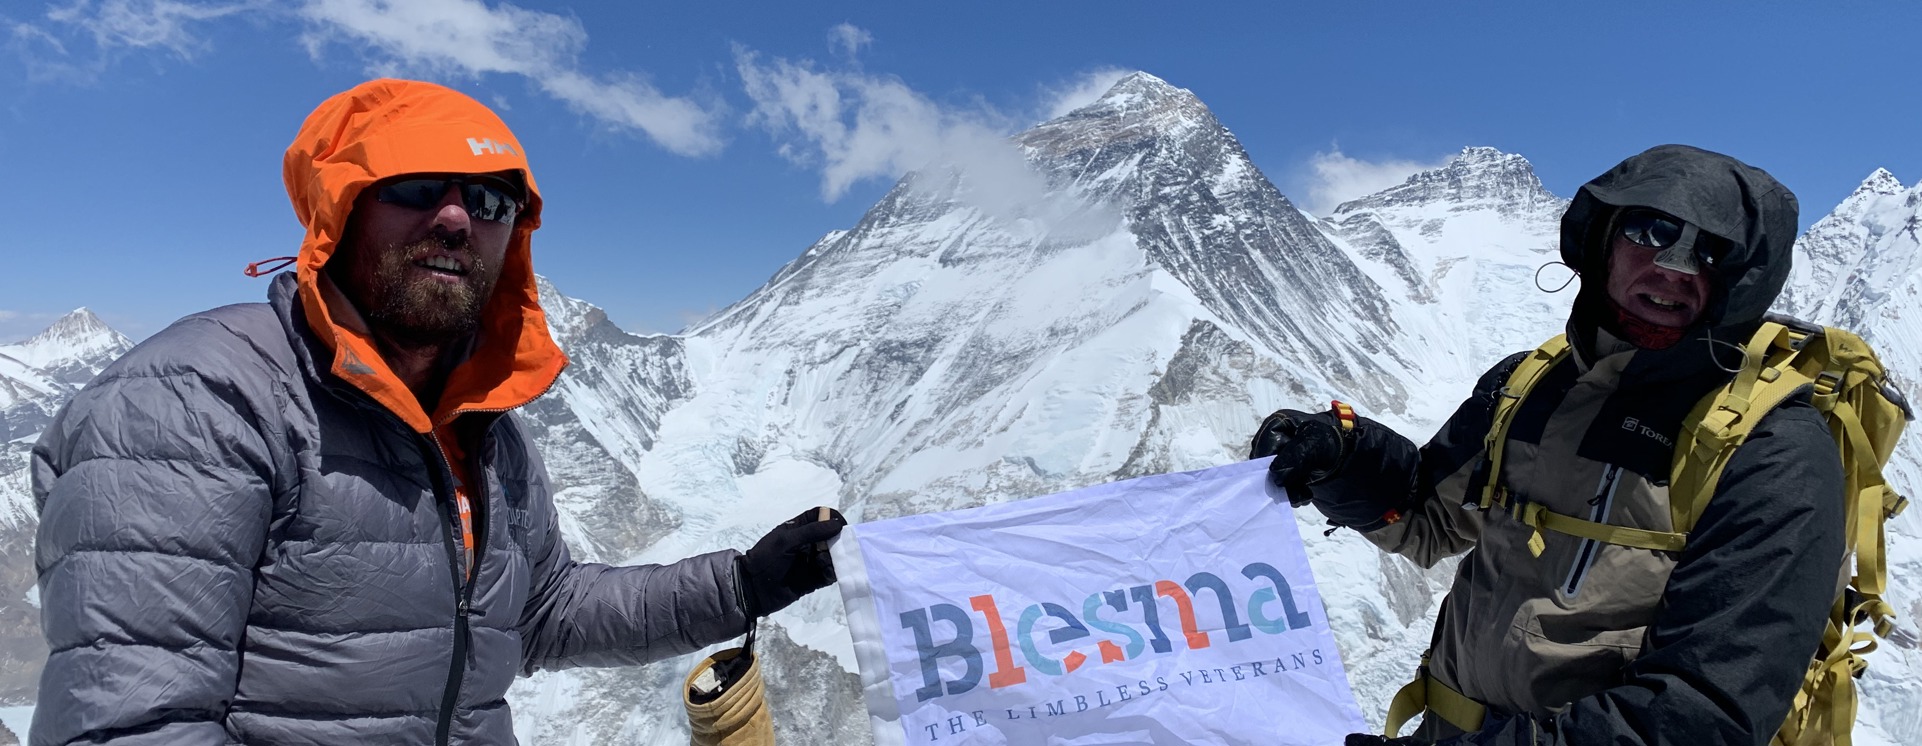 Two men stand atop everest with a Blesma Banner